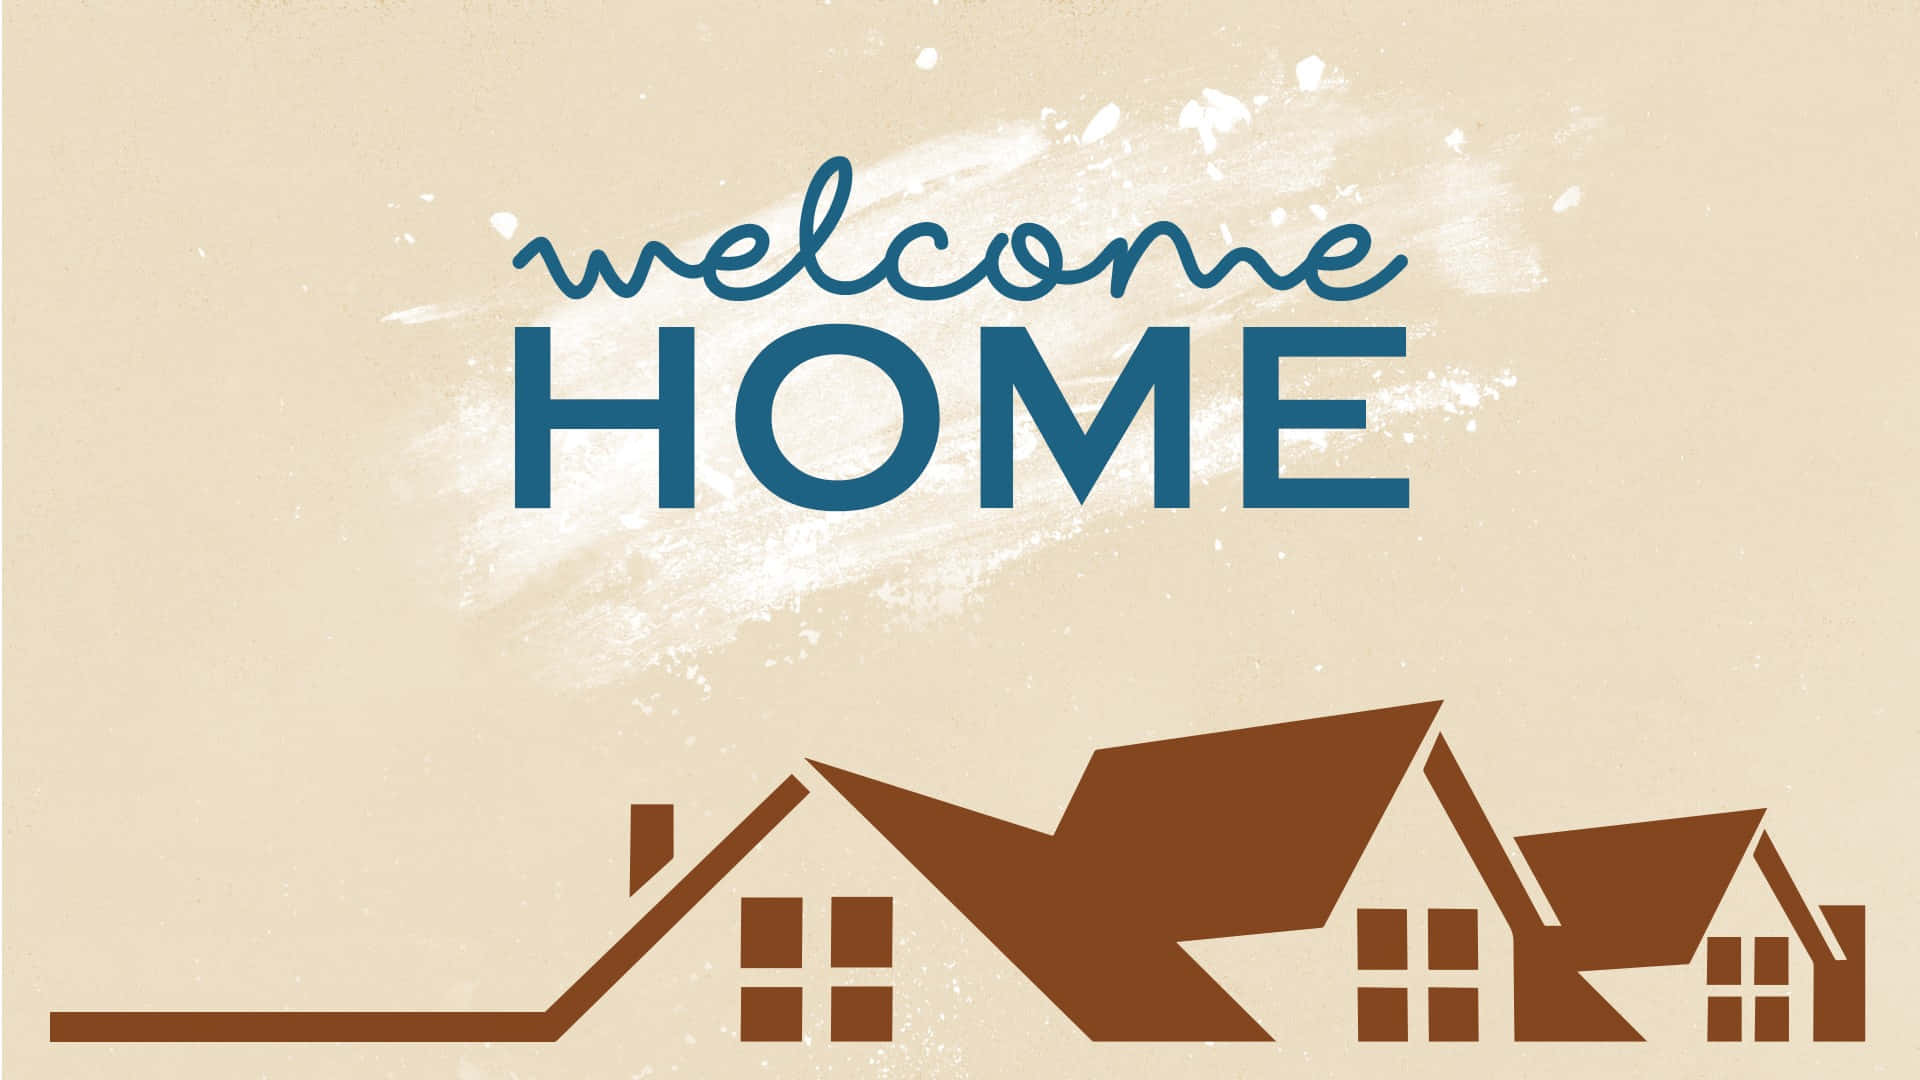 Welcome Home Signage Wallpaper